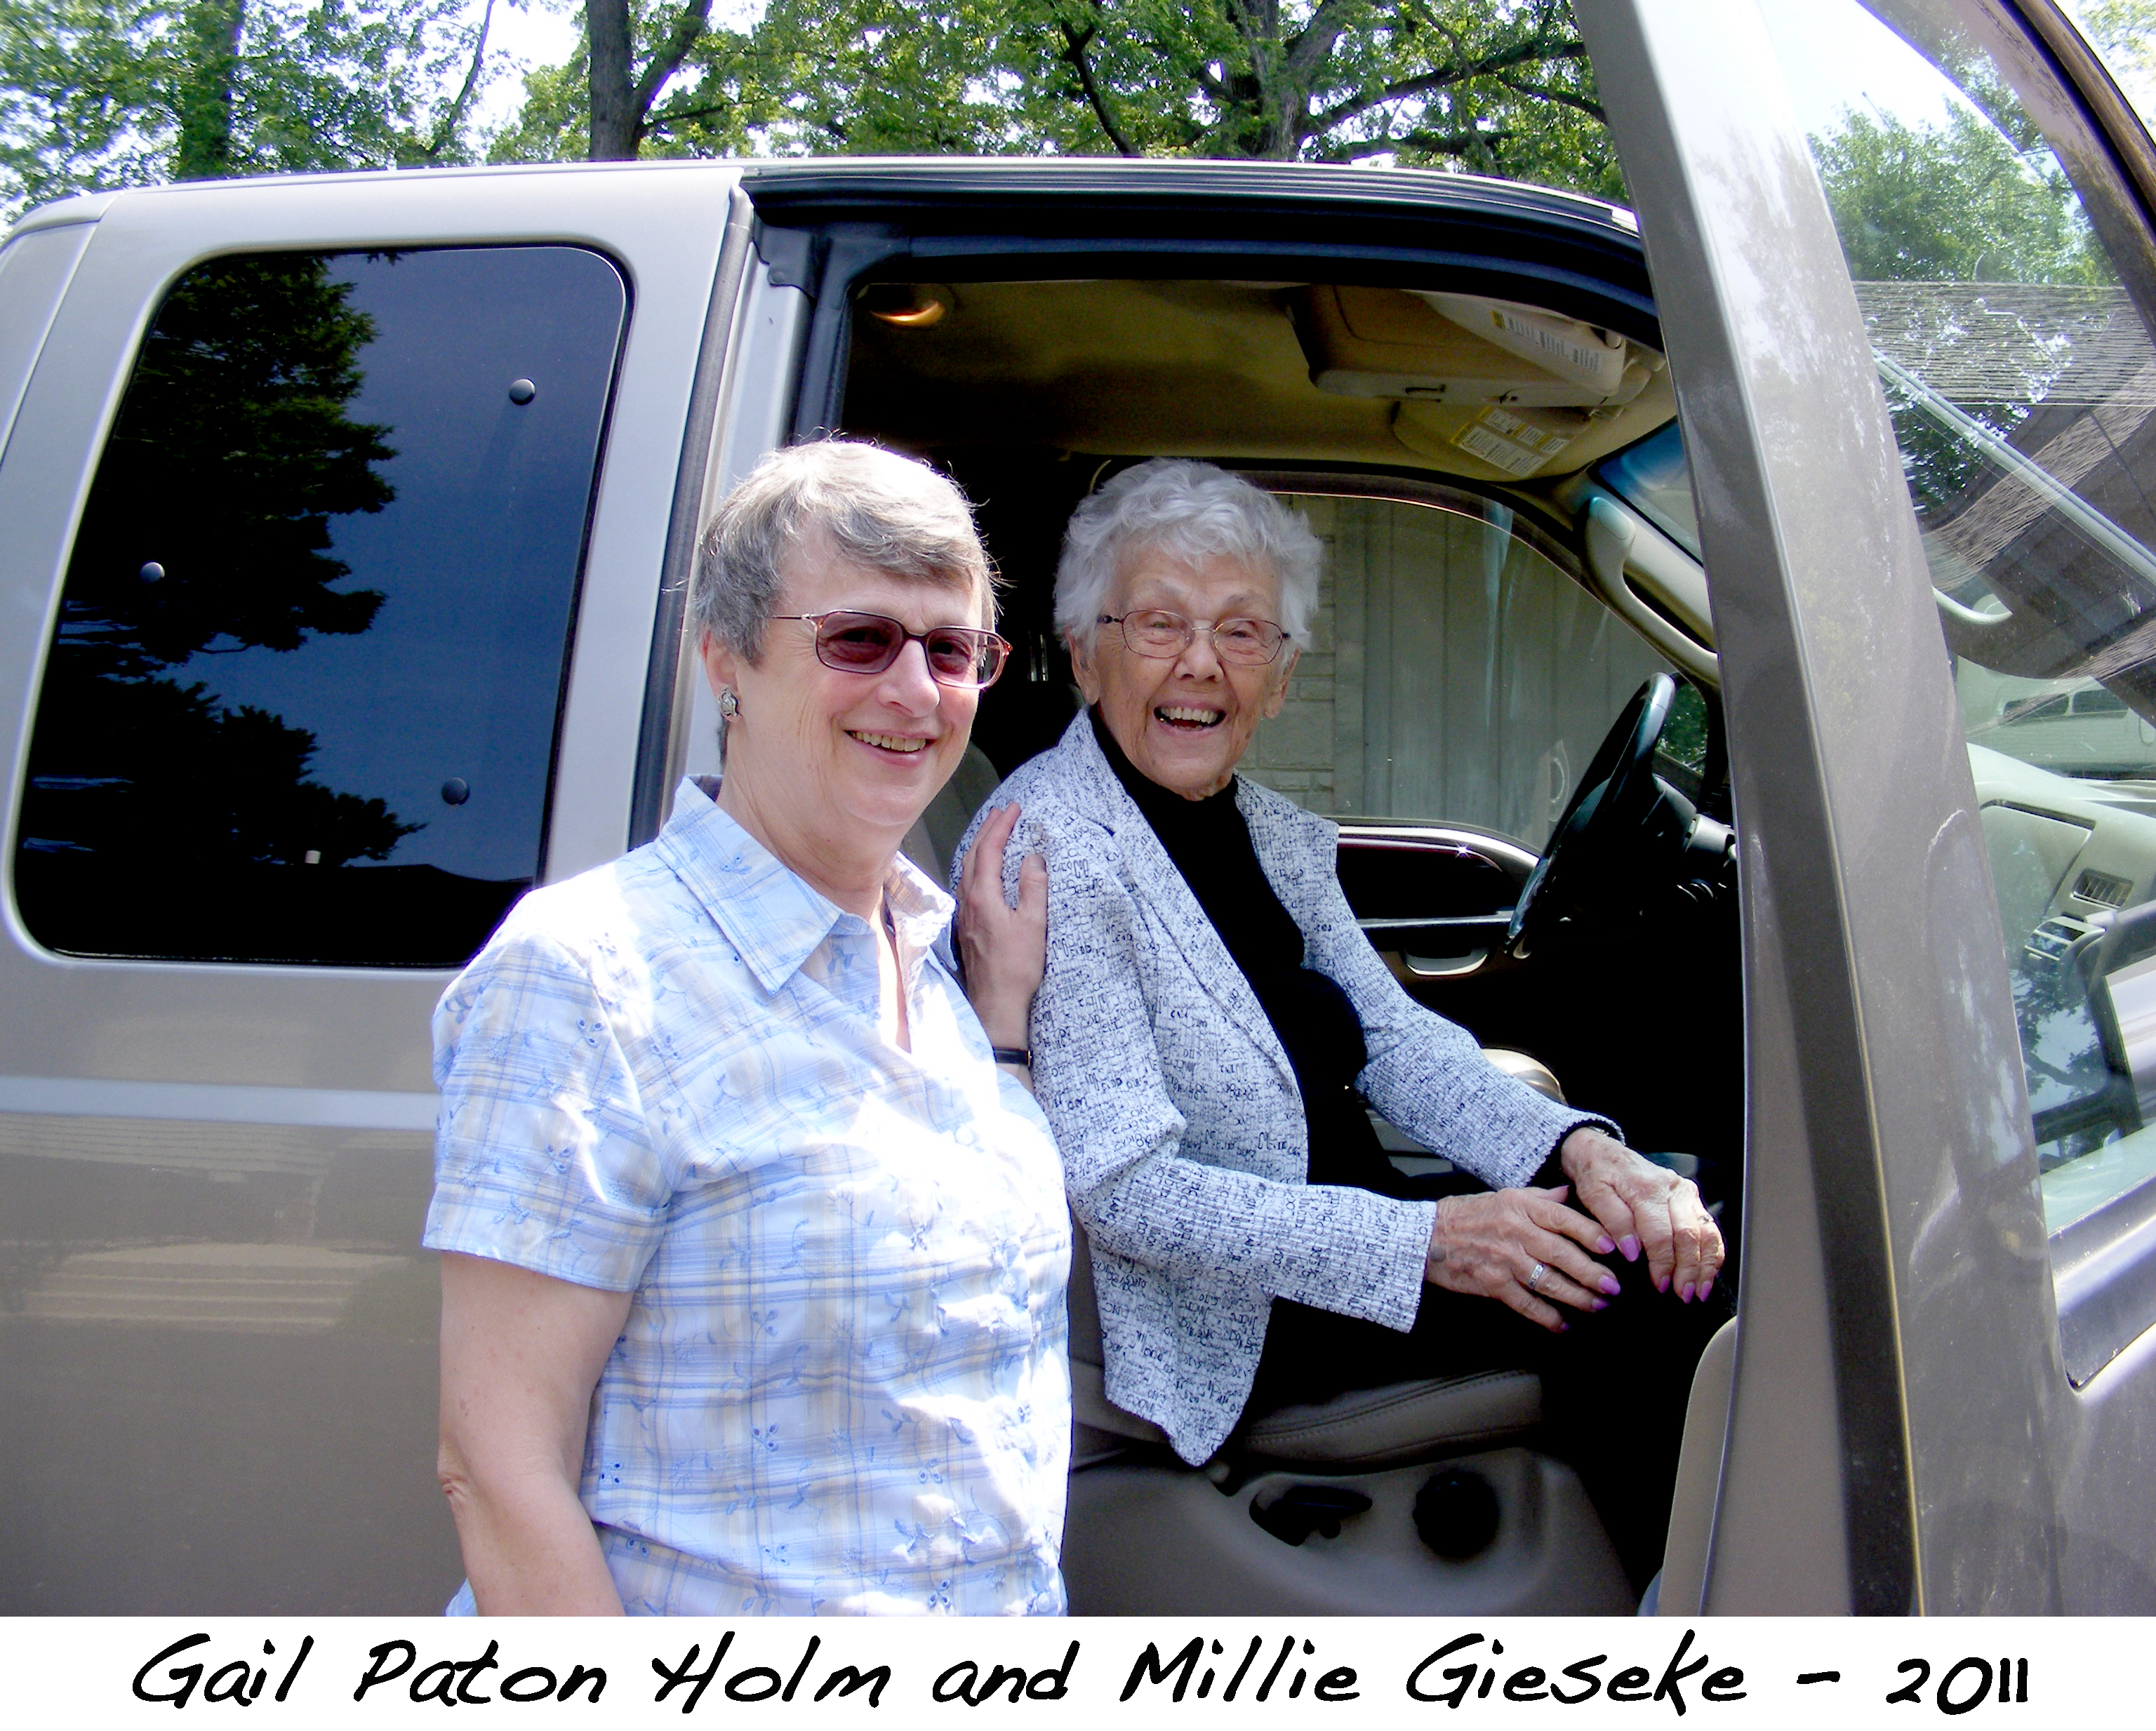 Gail Paton Holm and Millie Gieseke with our pickup